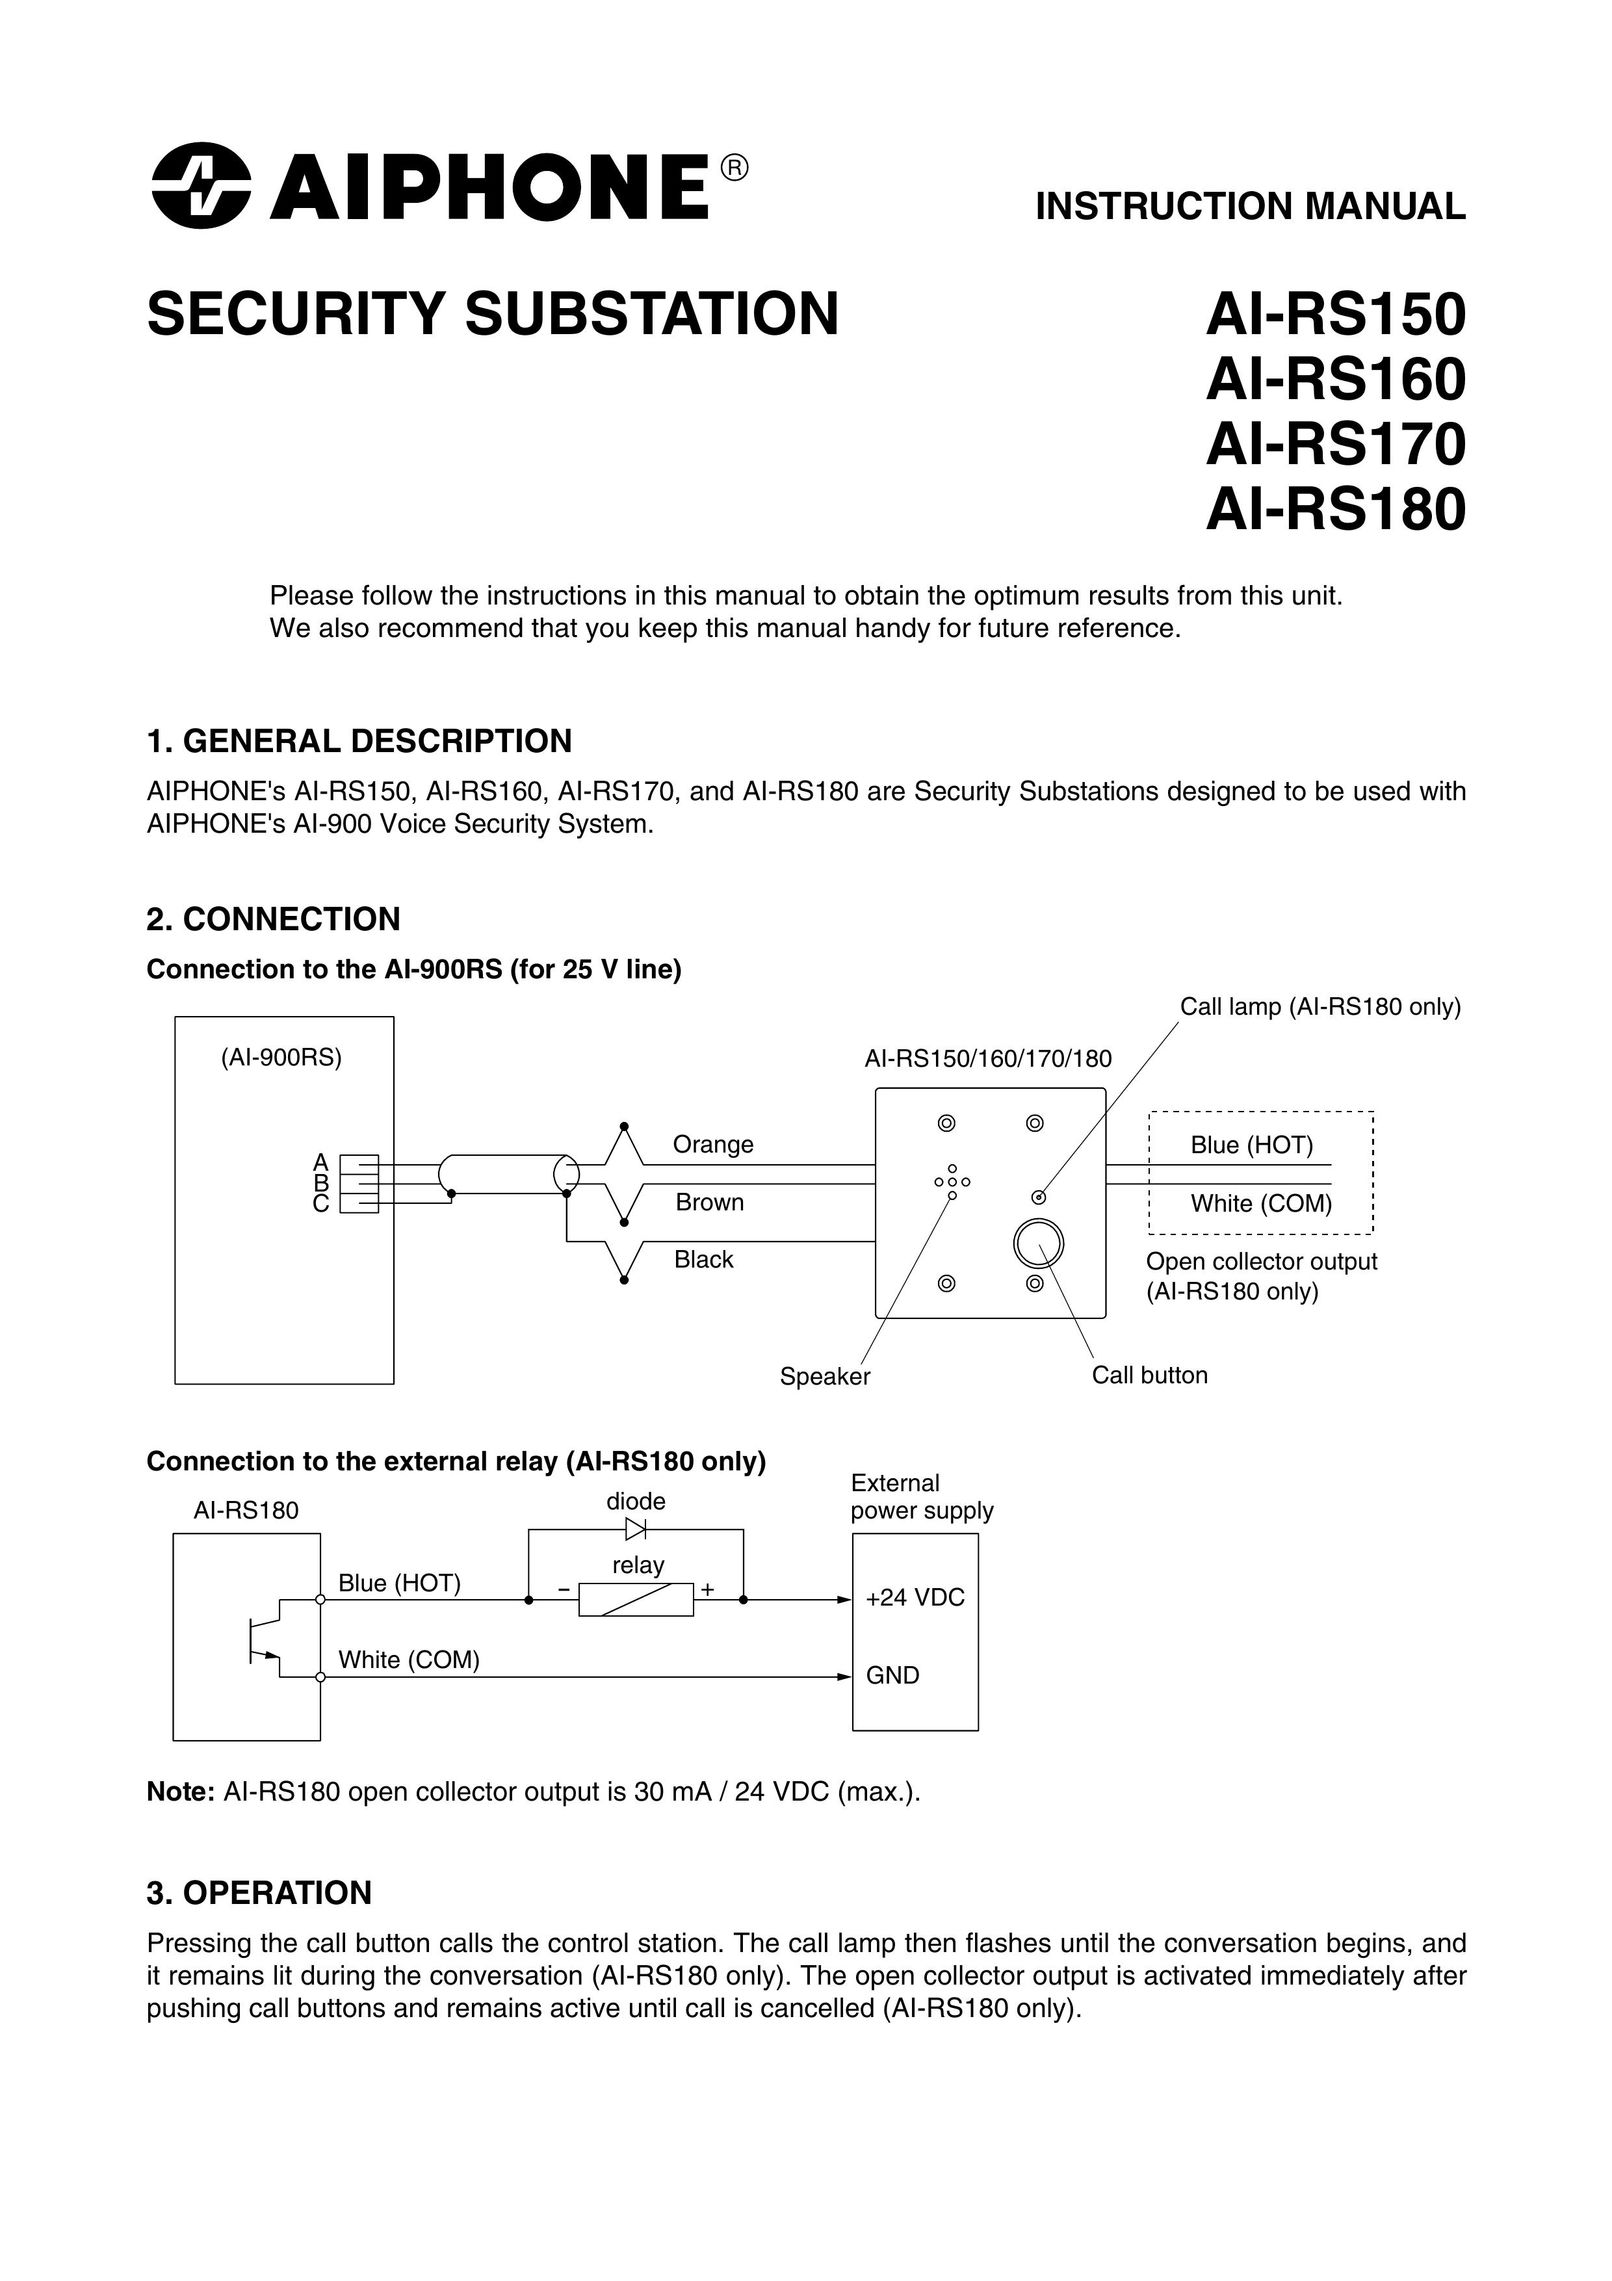 Aiphone AI-RS160 Home Security System User Manual